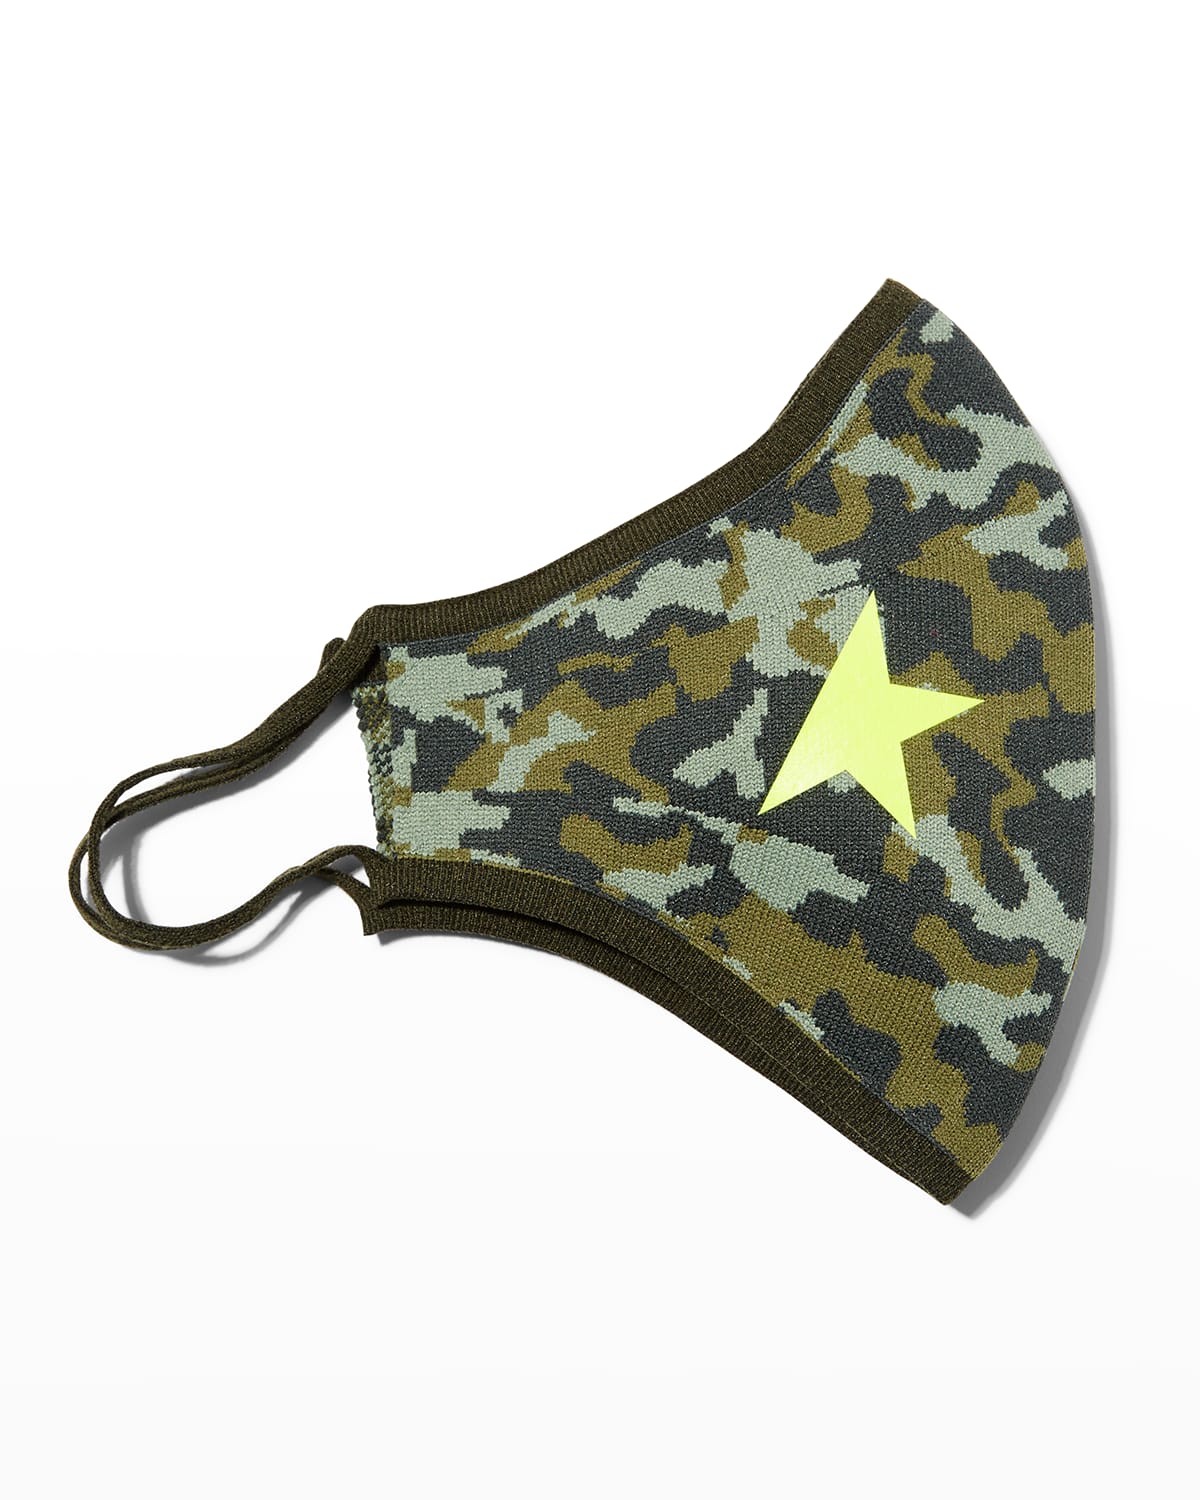 Camo Star Face Mask Covering